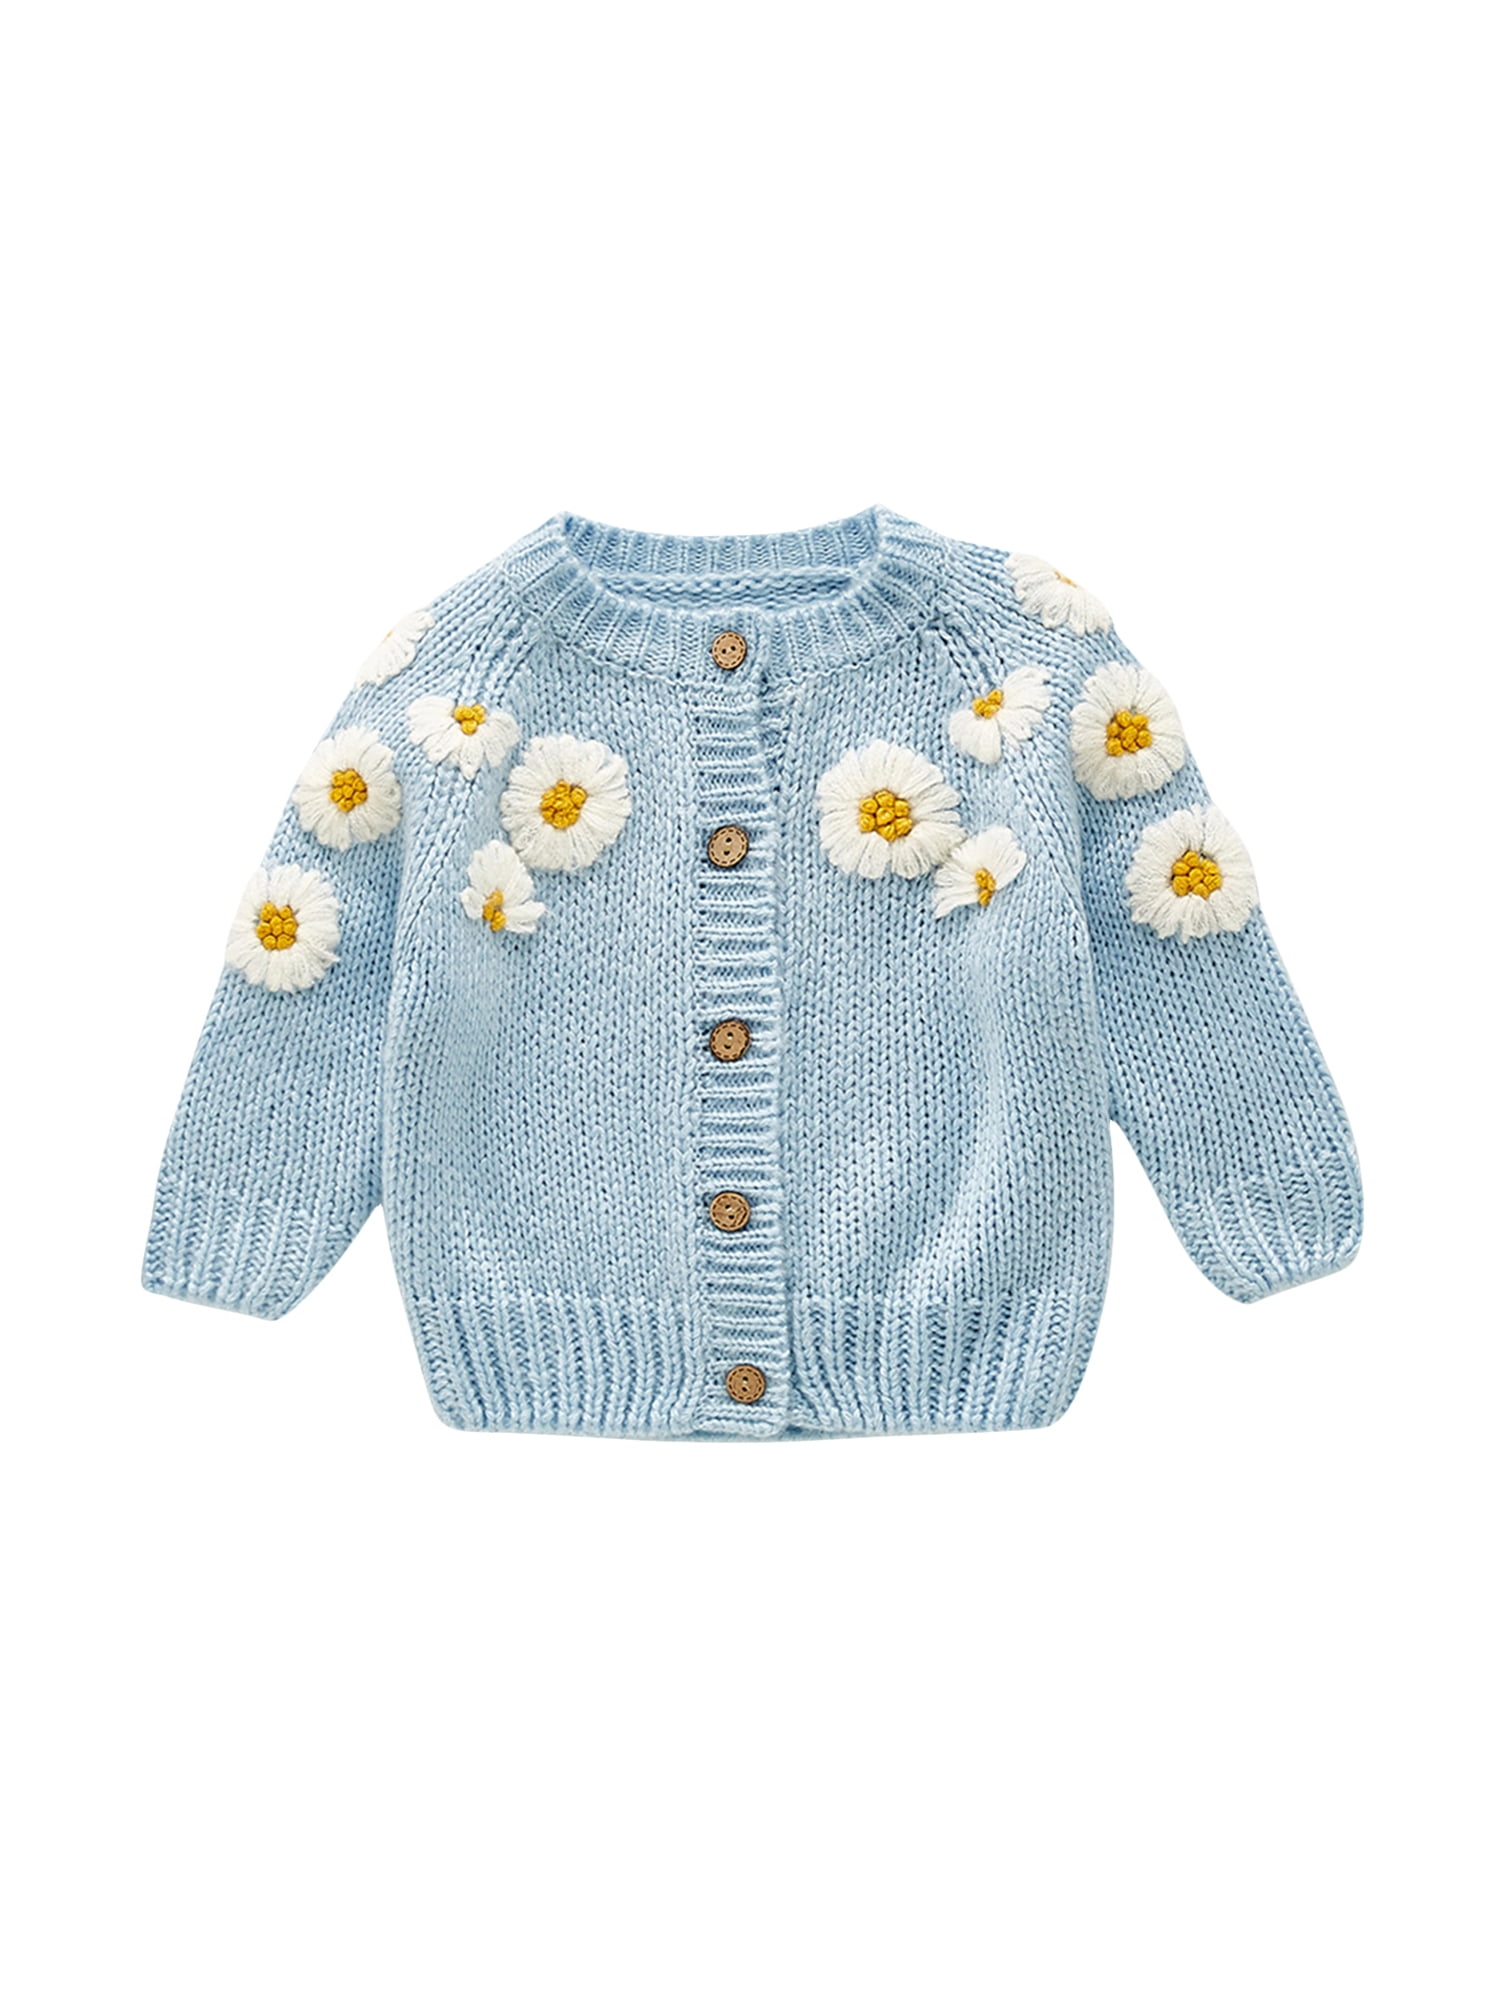 Toddlers Fall Sweater Cardigan Button Baby Daisy Long Sweaters Coat Sleeve Front Knit Girls Floral Open Clothes